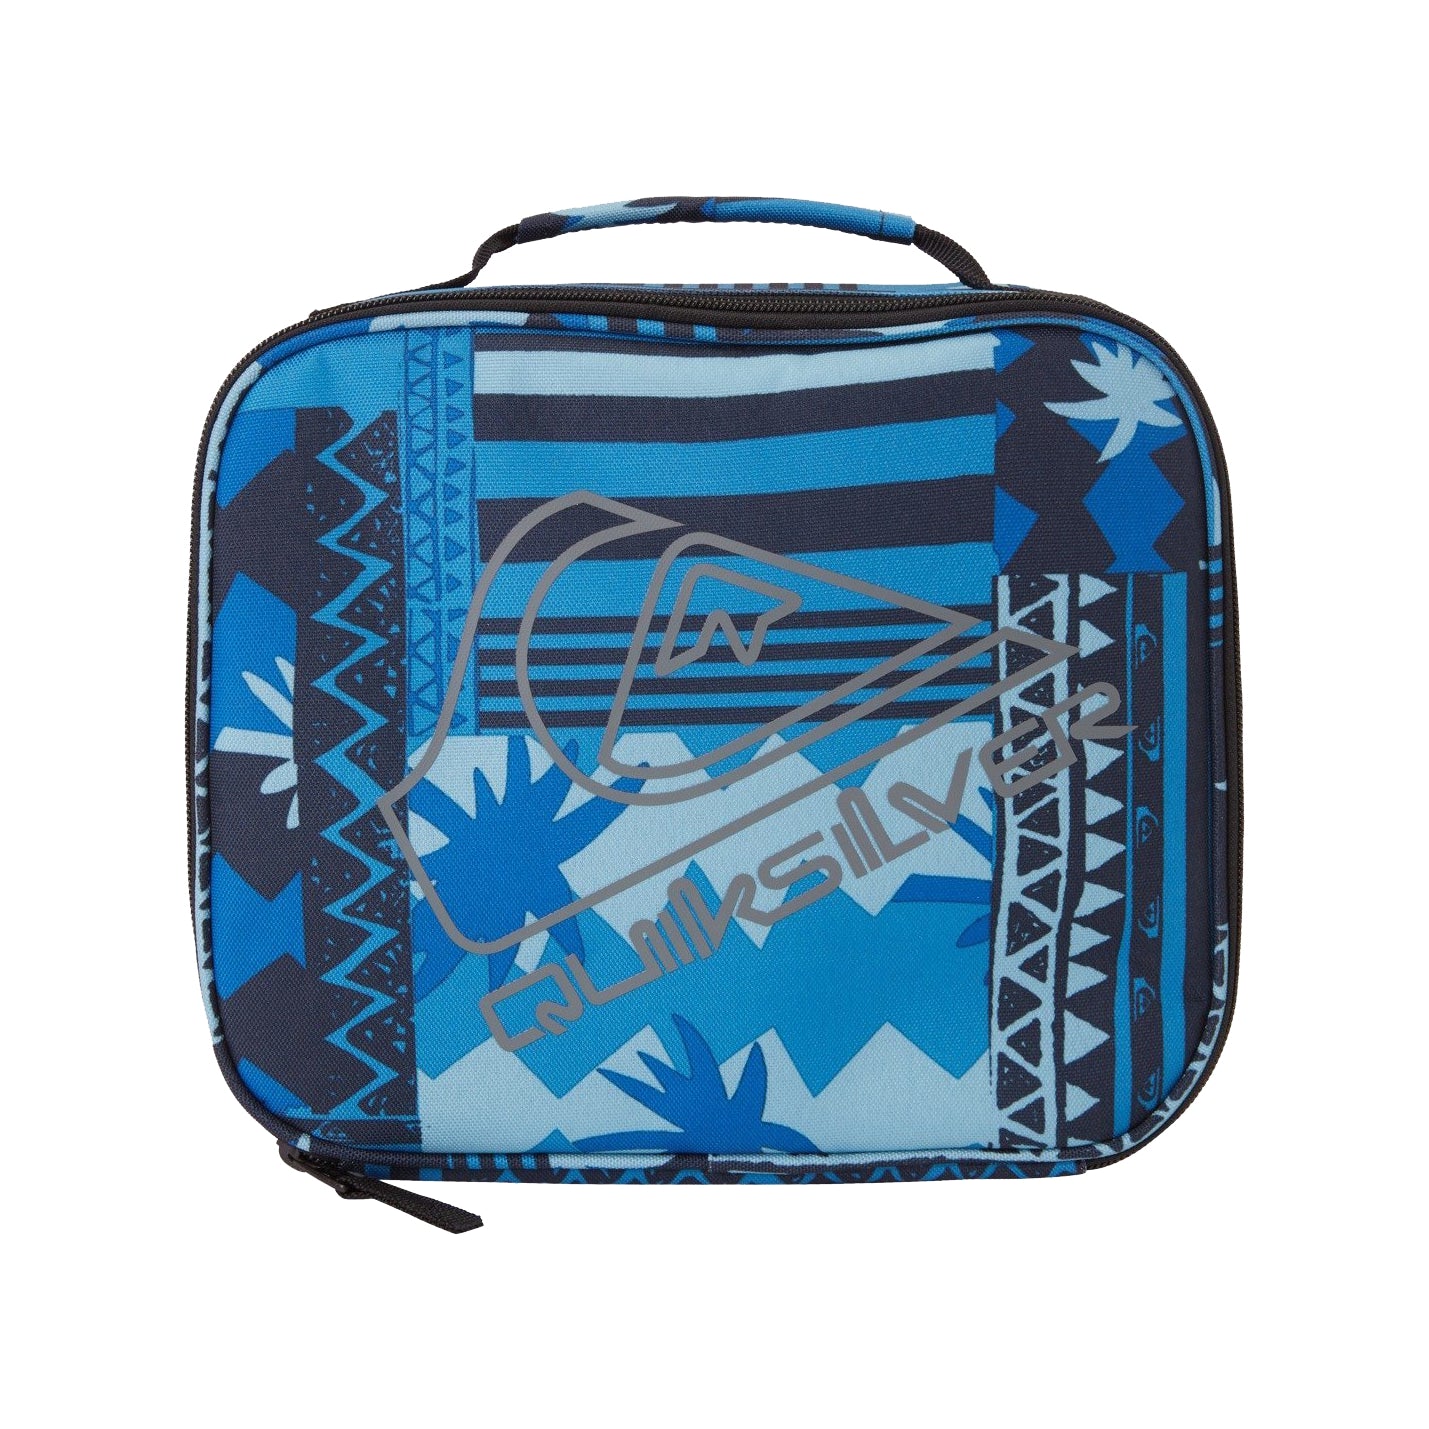 Quiksilver Boys 8-16 Lunch Boxer Lunch Box BYJ6 OS